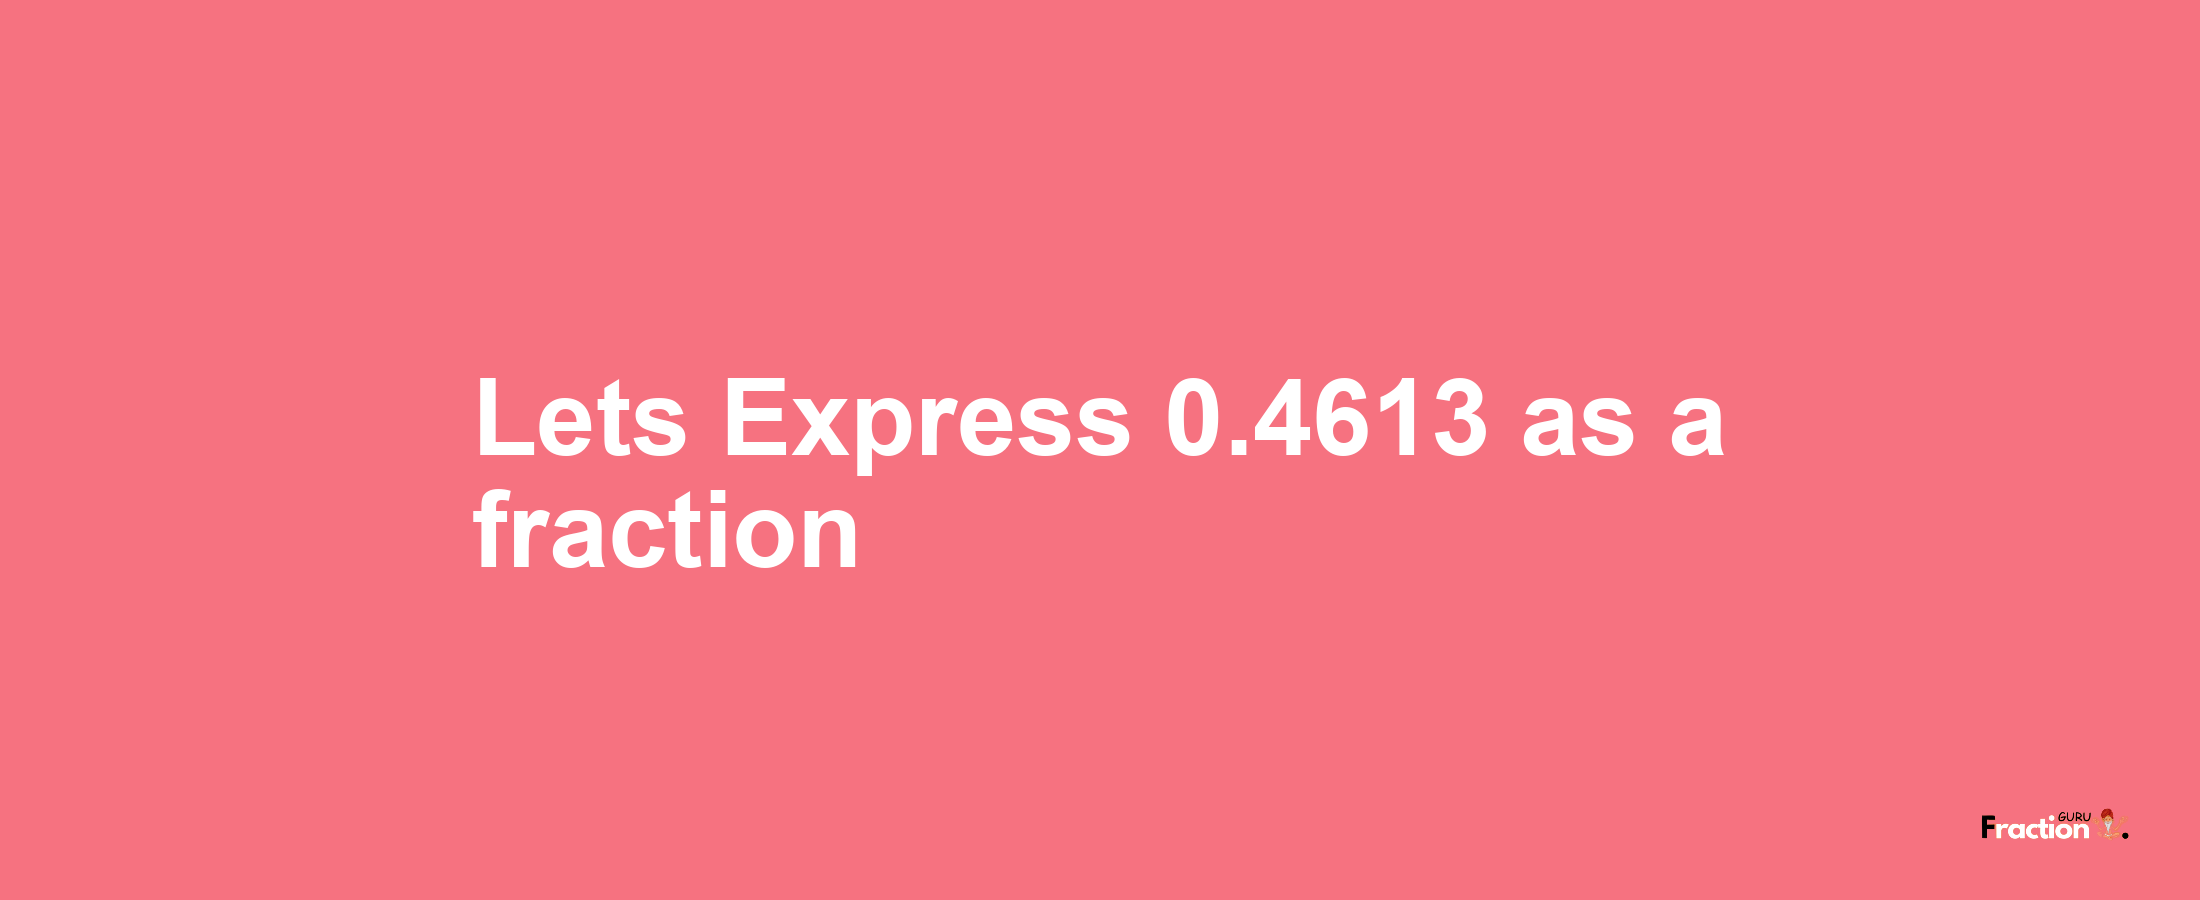 Lets Express 0.4613 as afraction